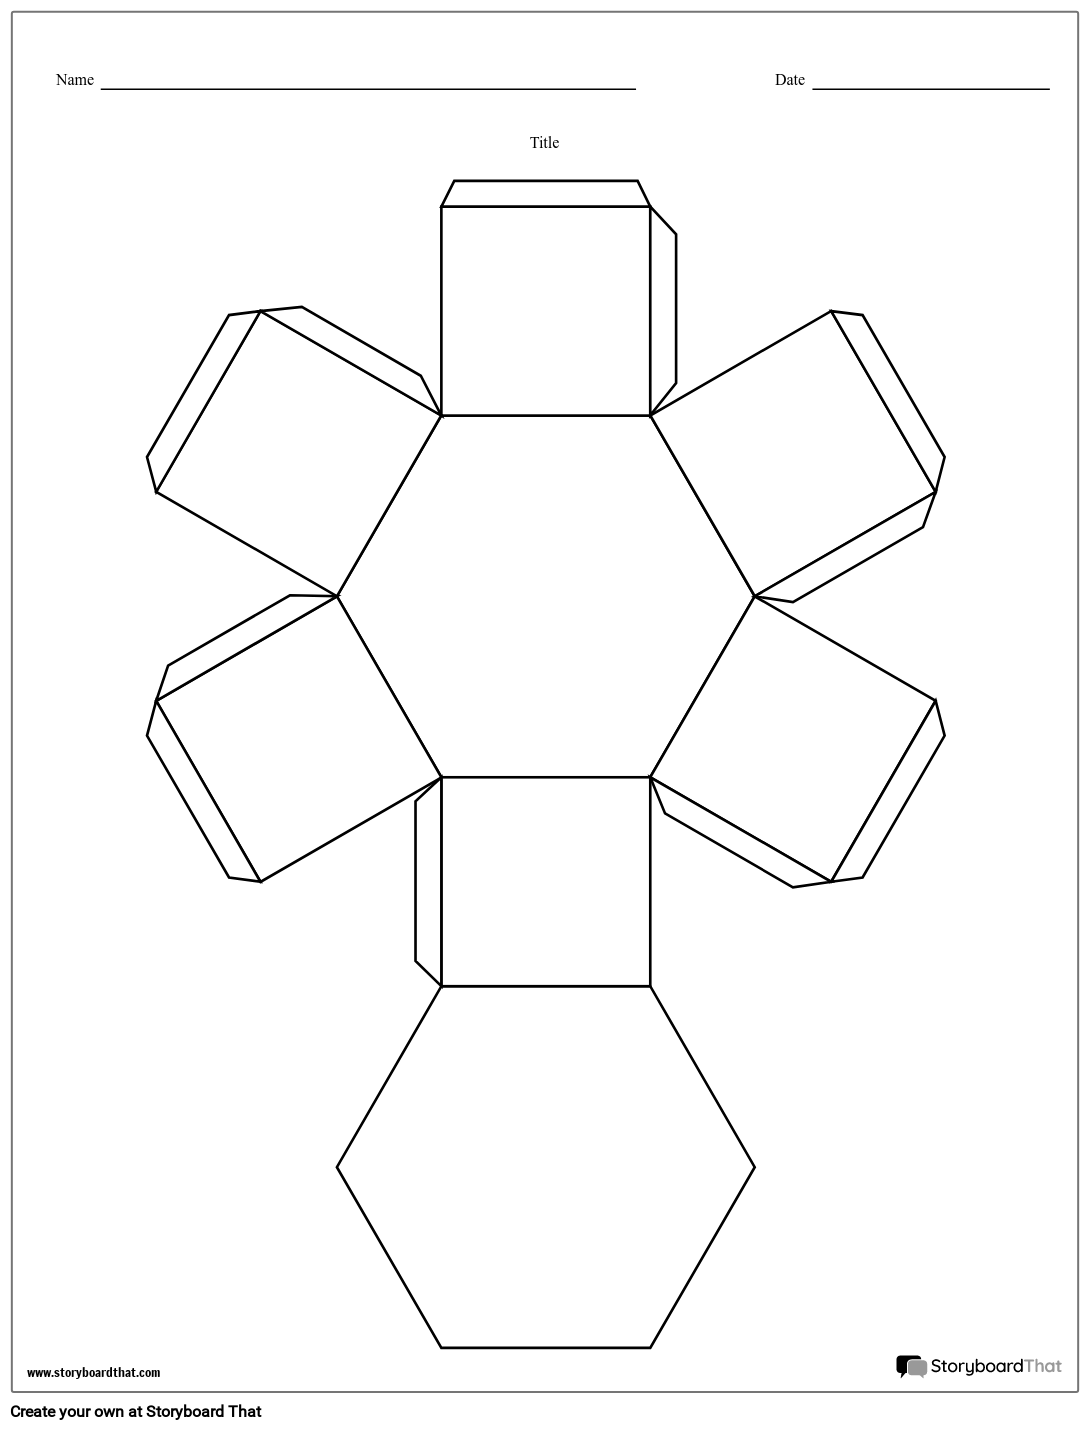 10-sided-cube-free-printable-template-printable-paper-dice-template-pdf-make-your-own-6-10